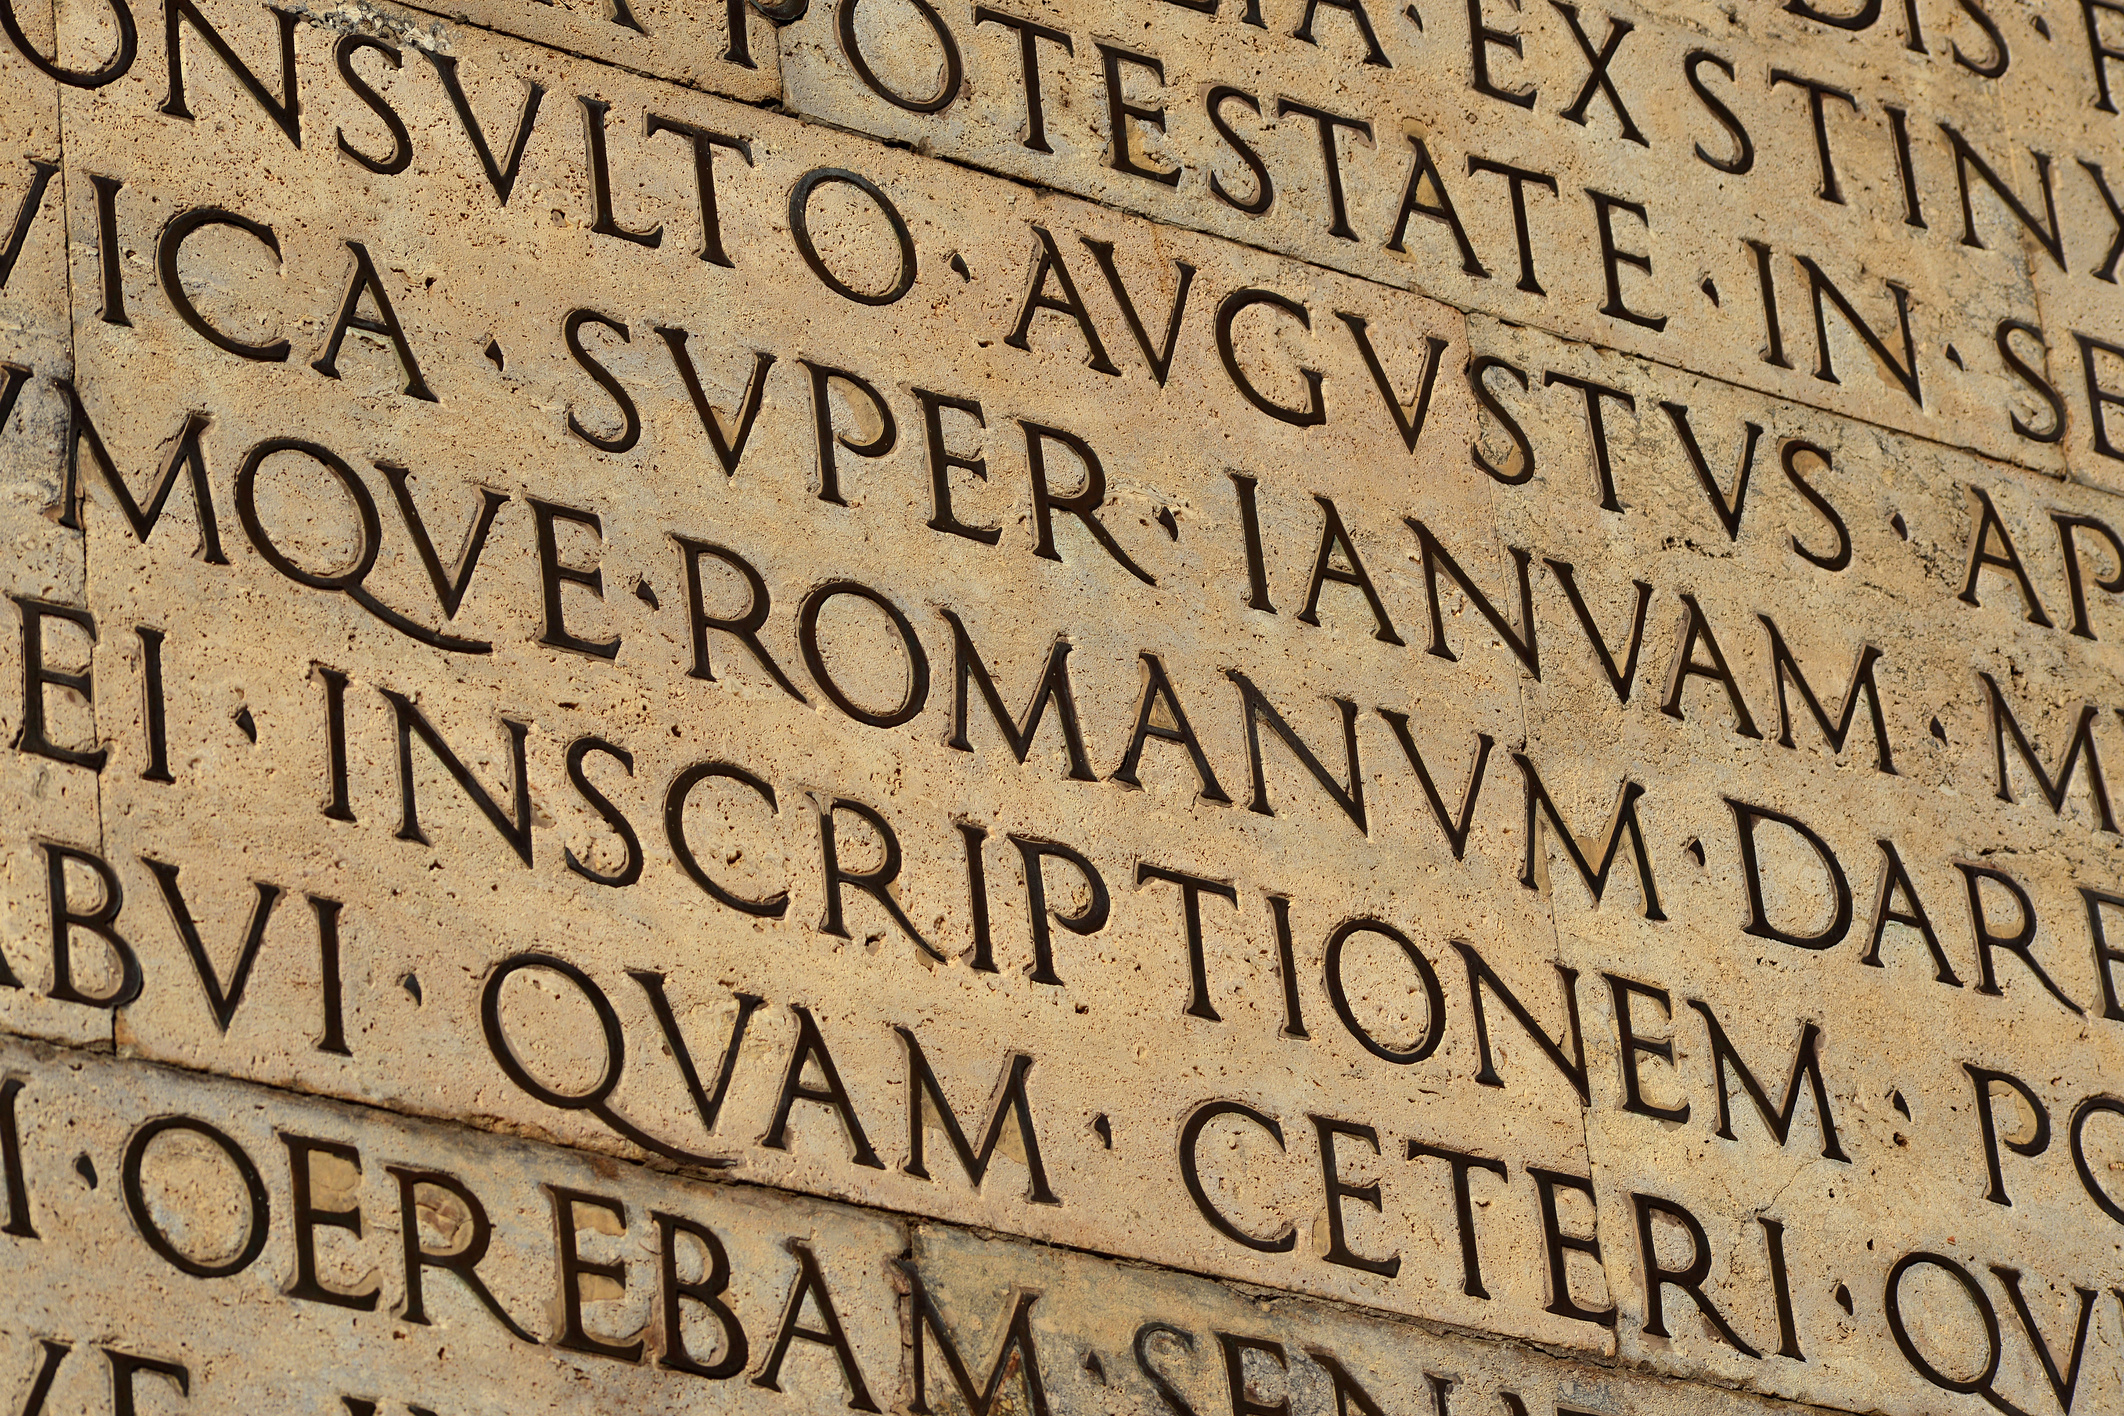 Latin ancient language and classical education